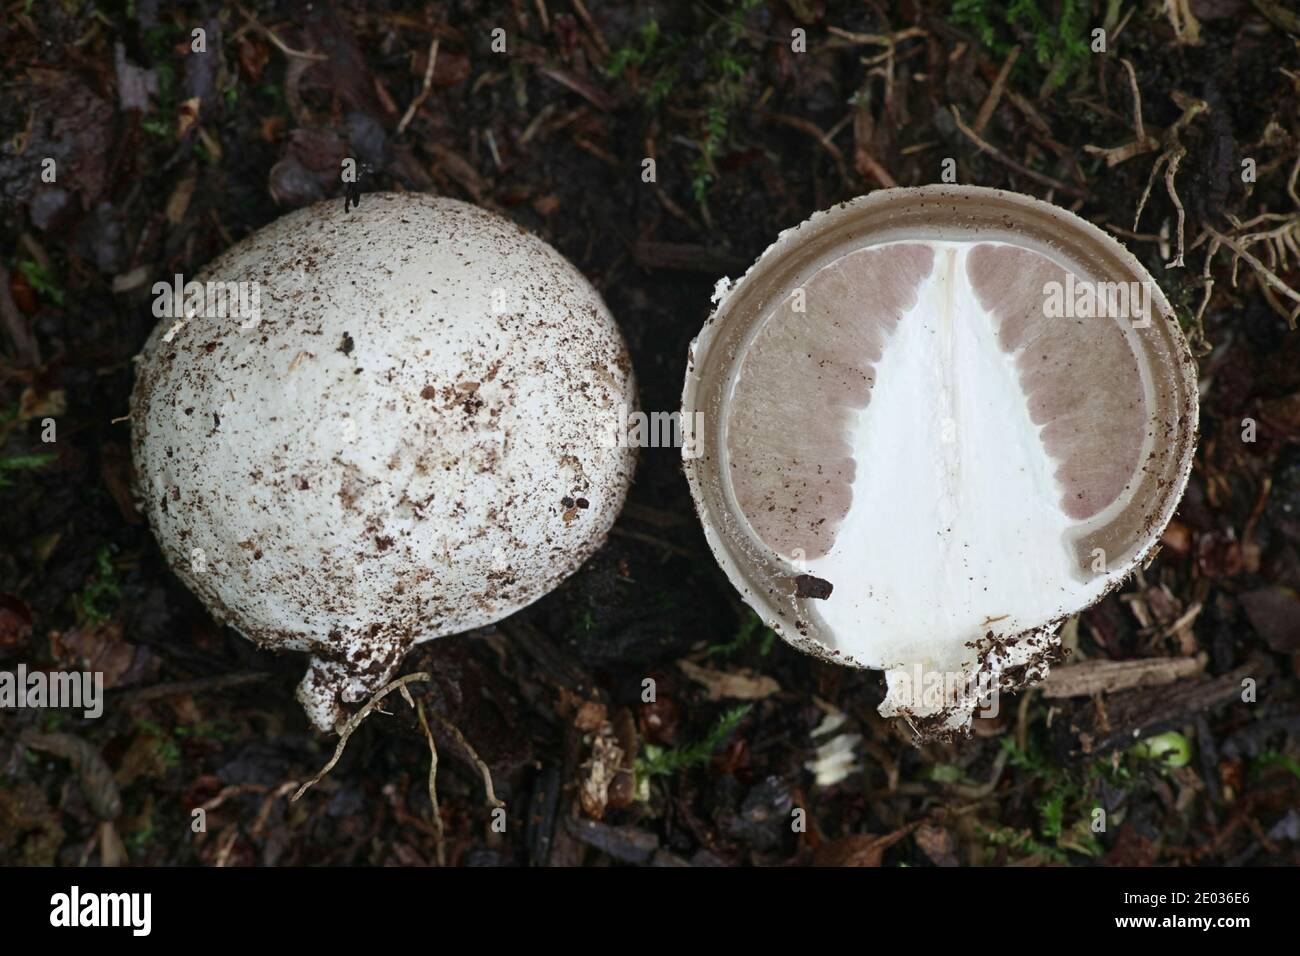 Phallus impudicus, known as the common stinkhorn, the early egg stage sometimes called the witch's egg split open Stock Photo